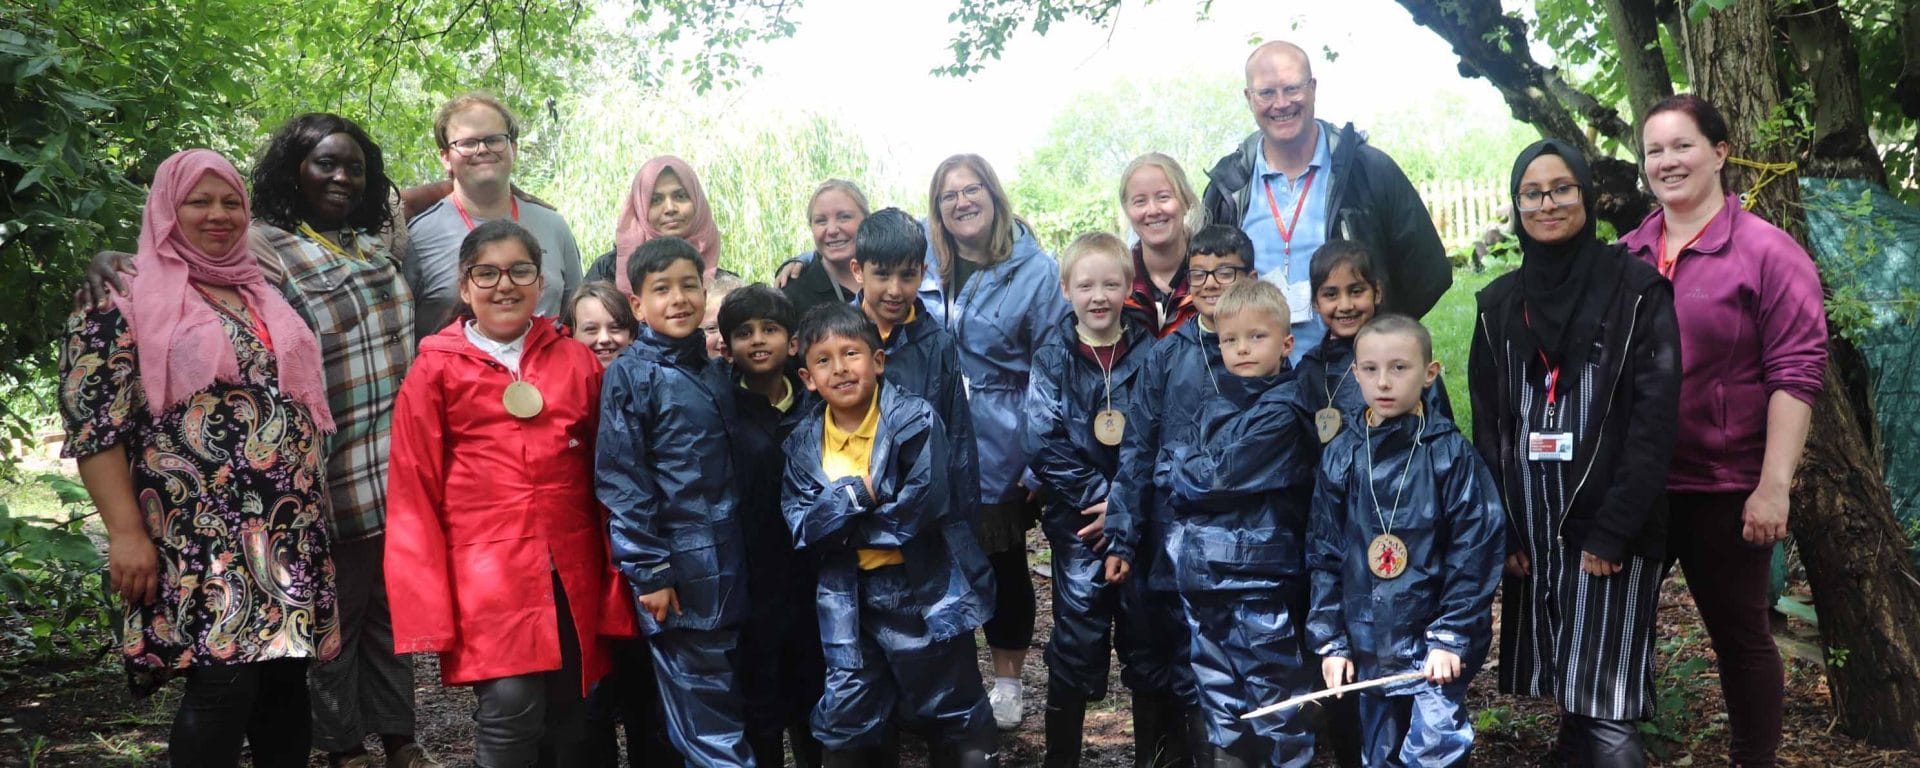 Group Picture of Chuckery Primary School students @ Forest School